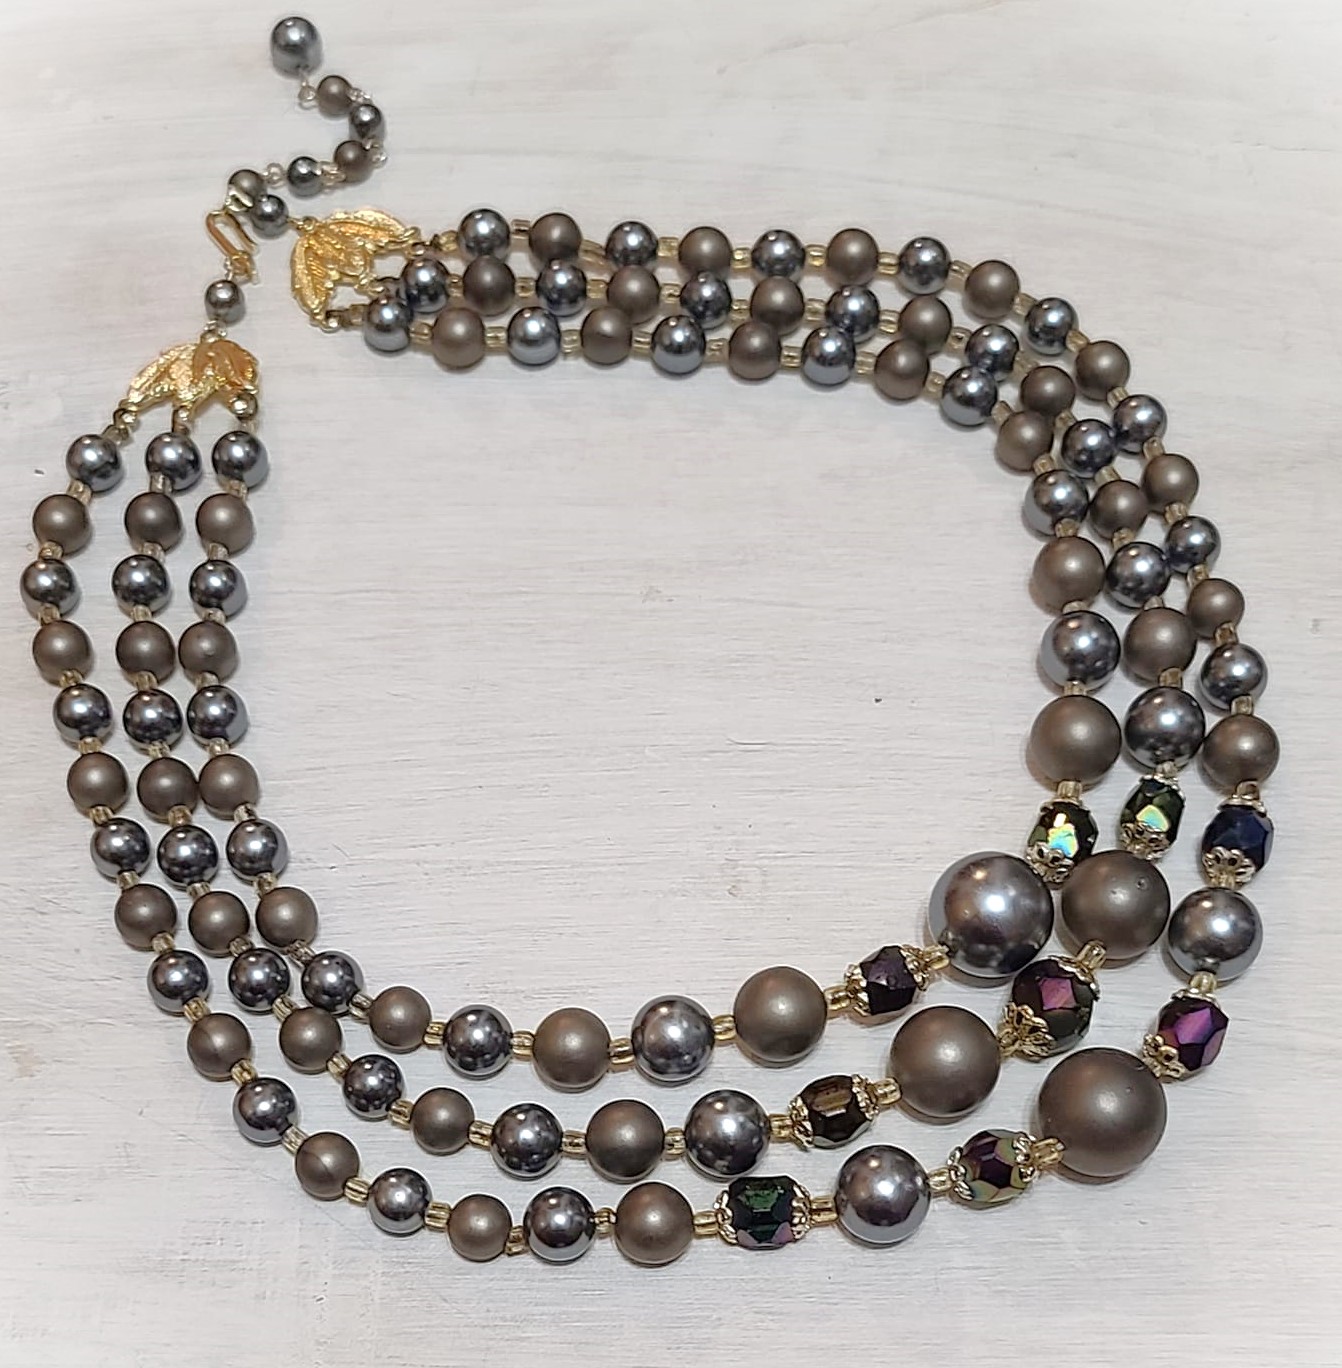 Grays, bronze and browns 3 strand beaded vintage necklace